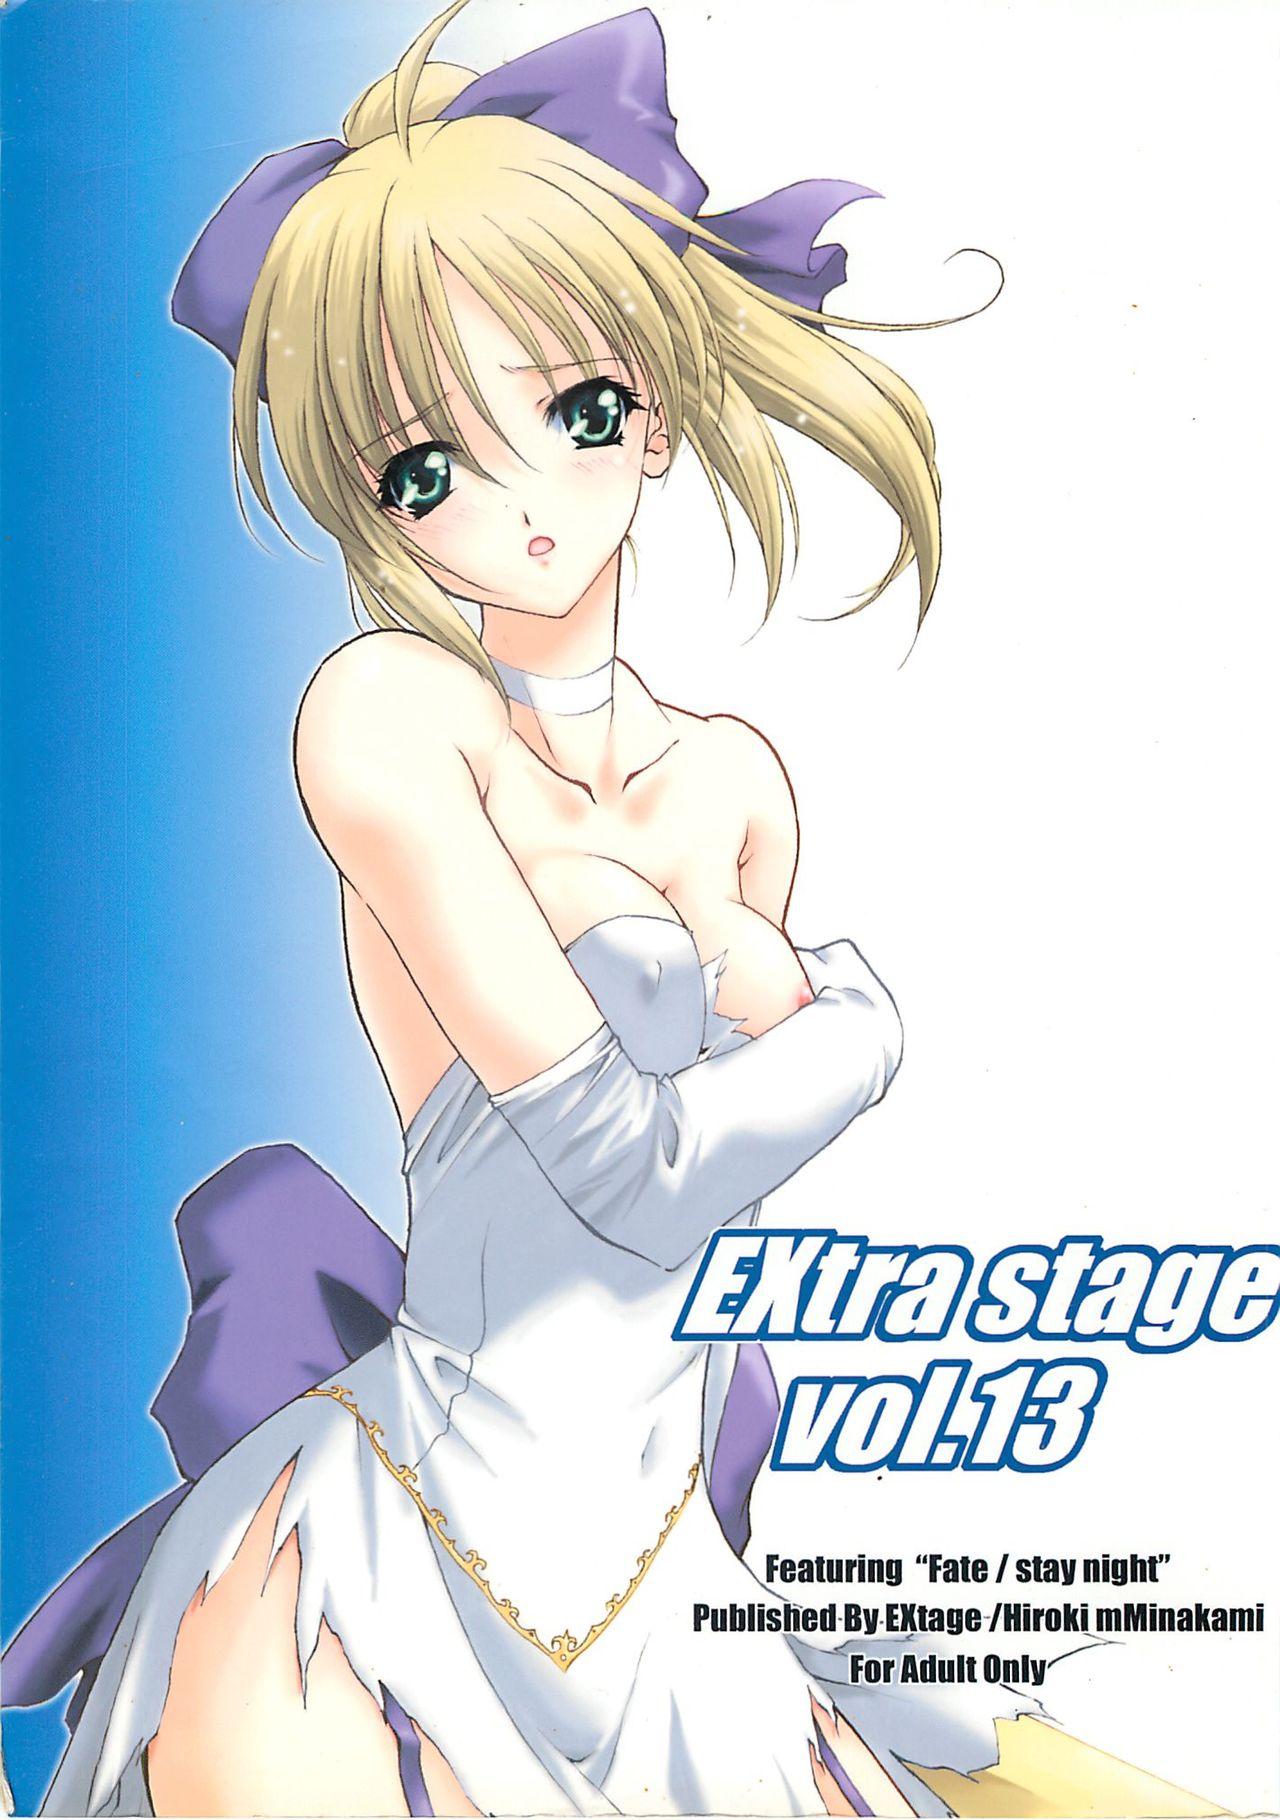 Jacking EXtra stage vol. 13 - Fate stay night Argentina - Picture 1